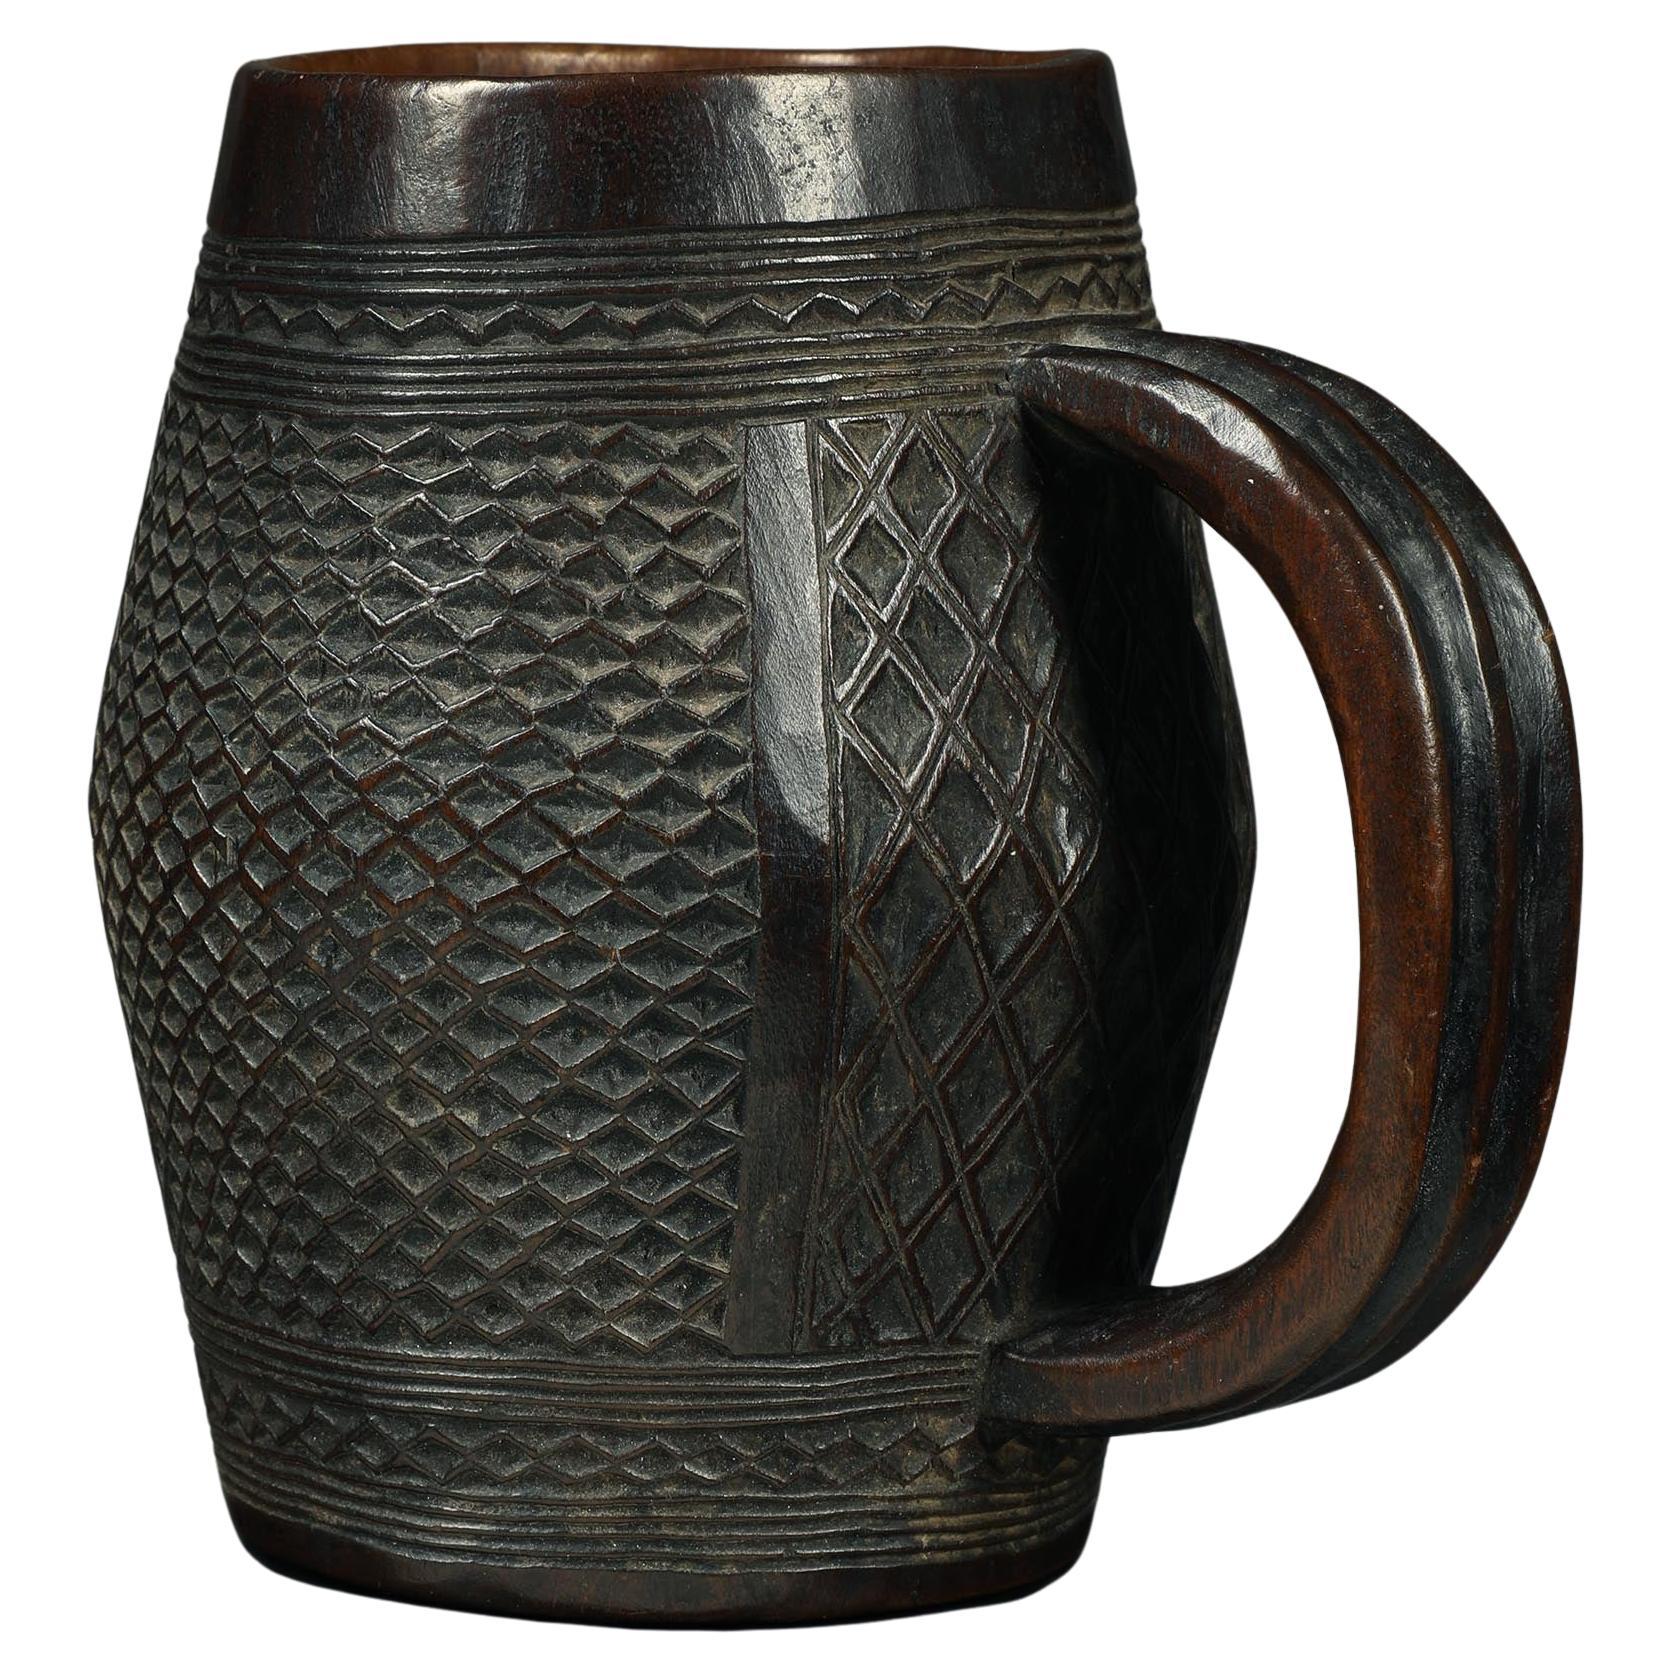 Fine Kuba Cup with Incised Textile Designs, early 20th century Central Africa  For Sale